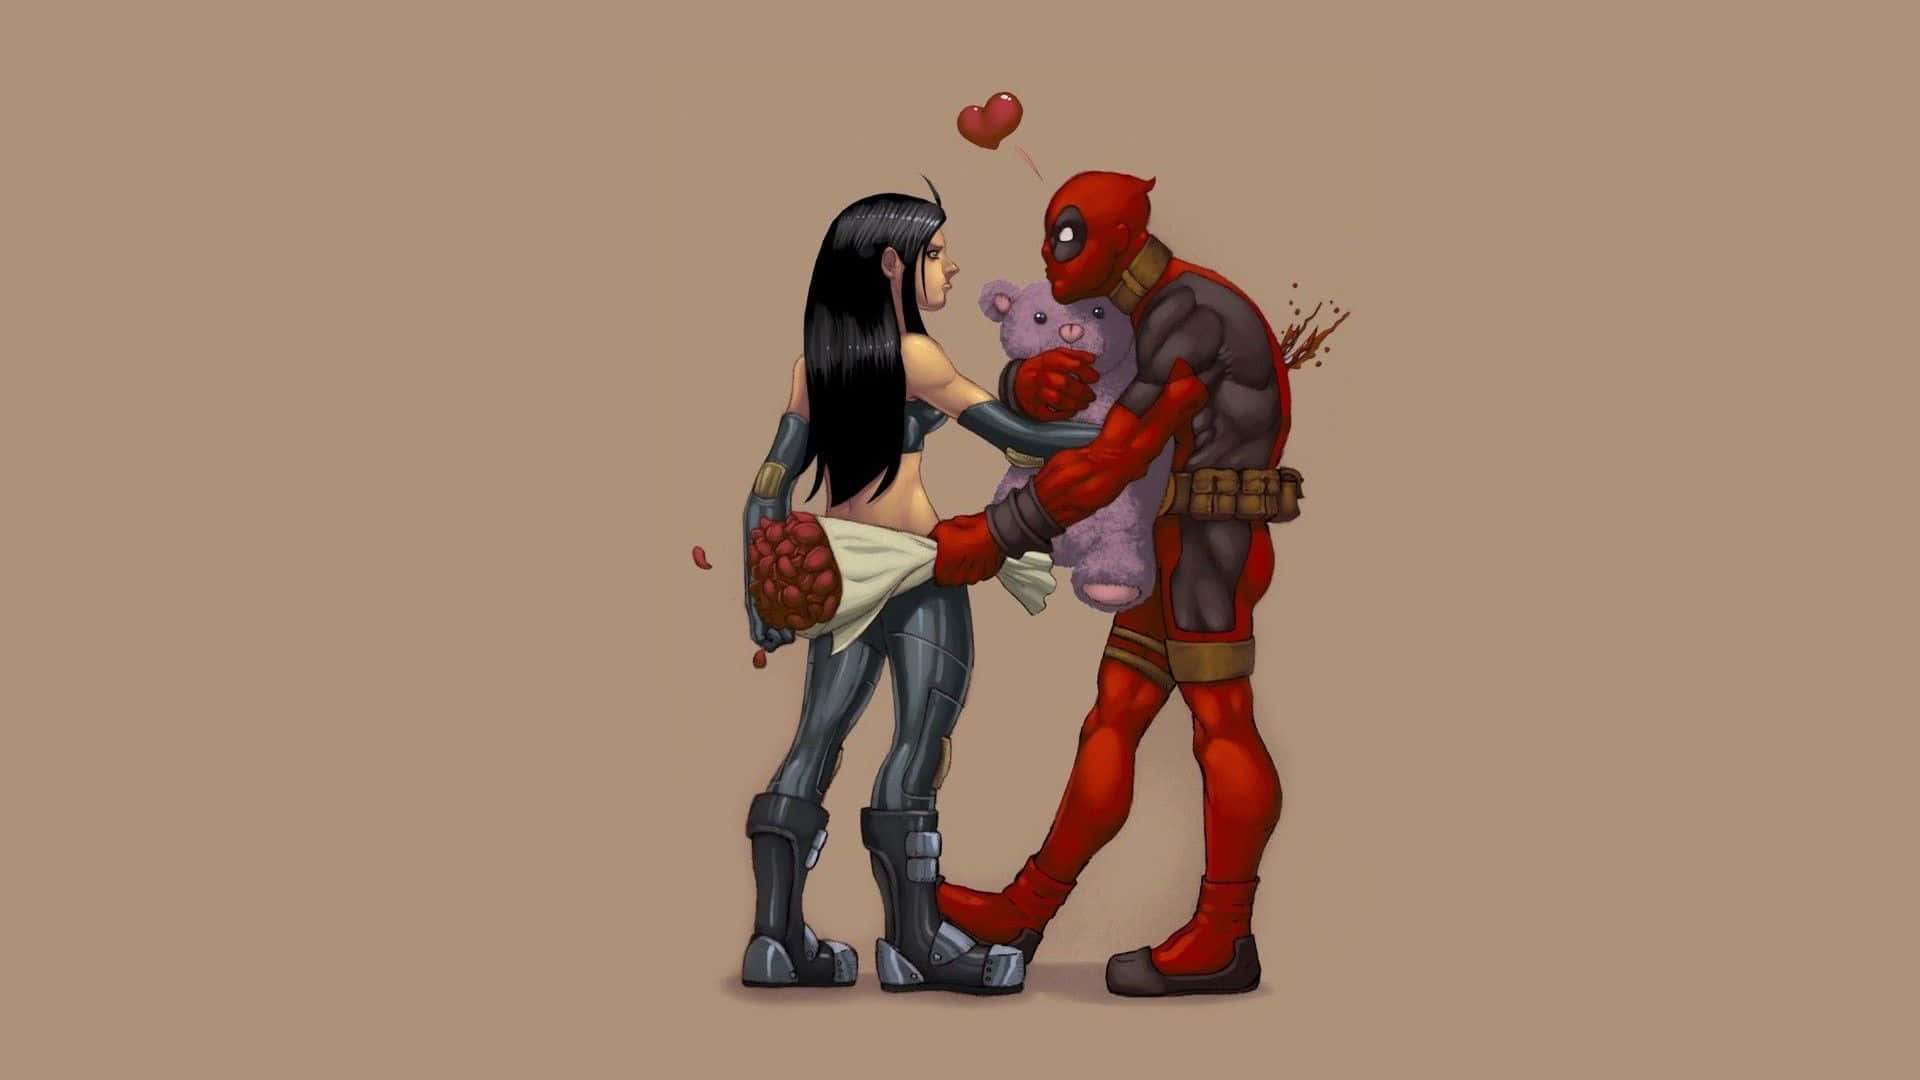 Deadpool is at it again with his silly antics! Wallpaper